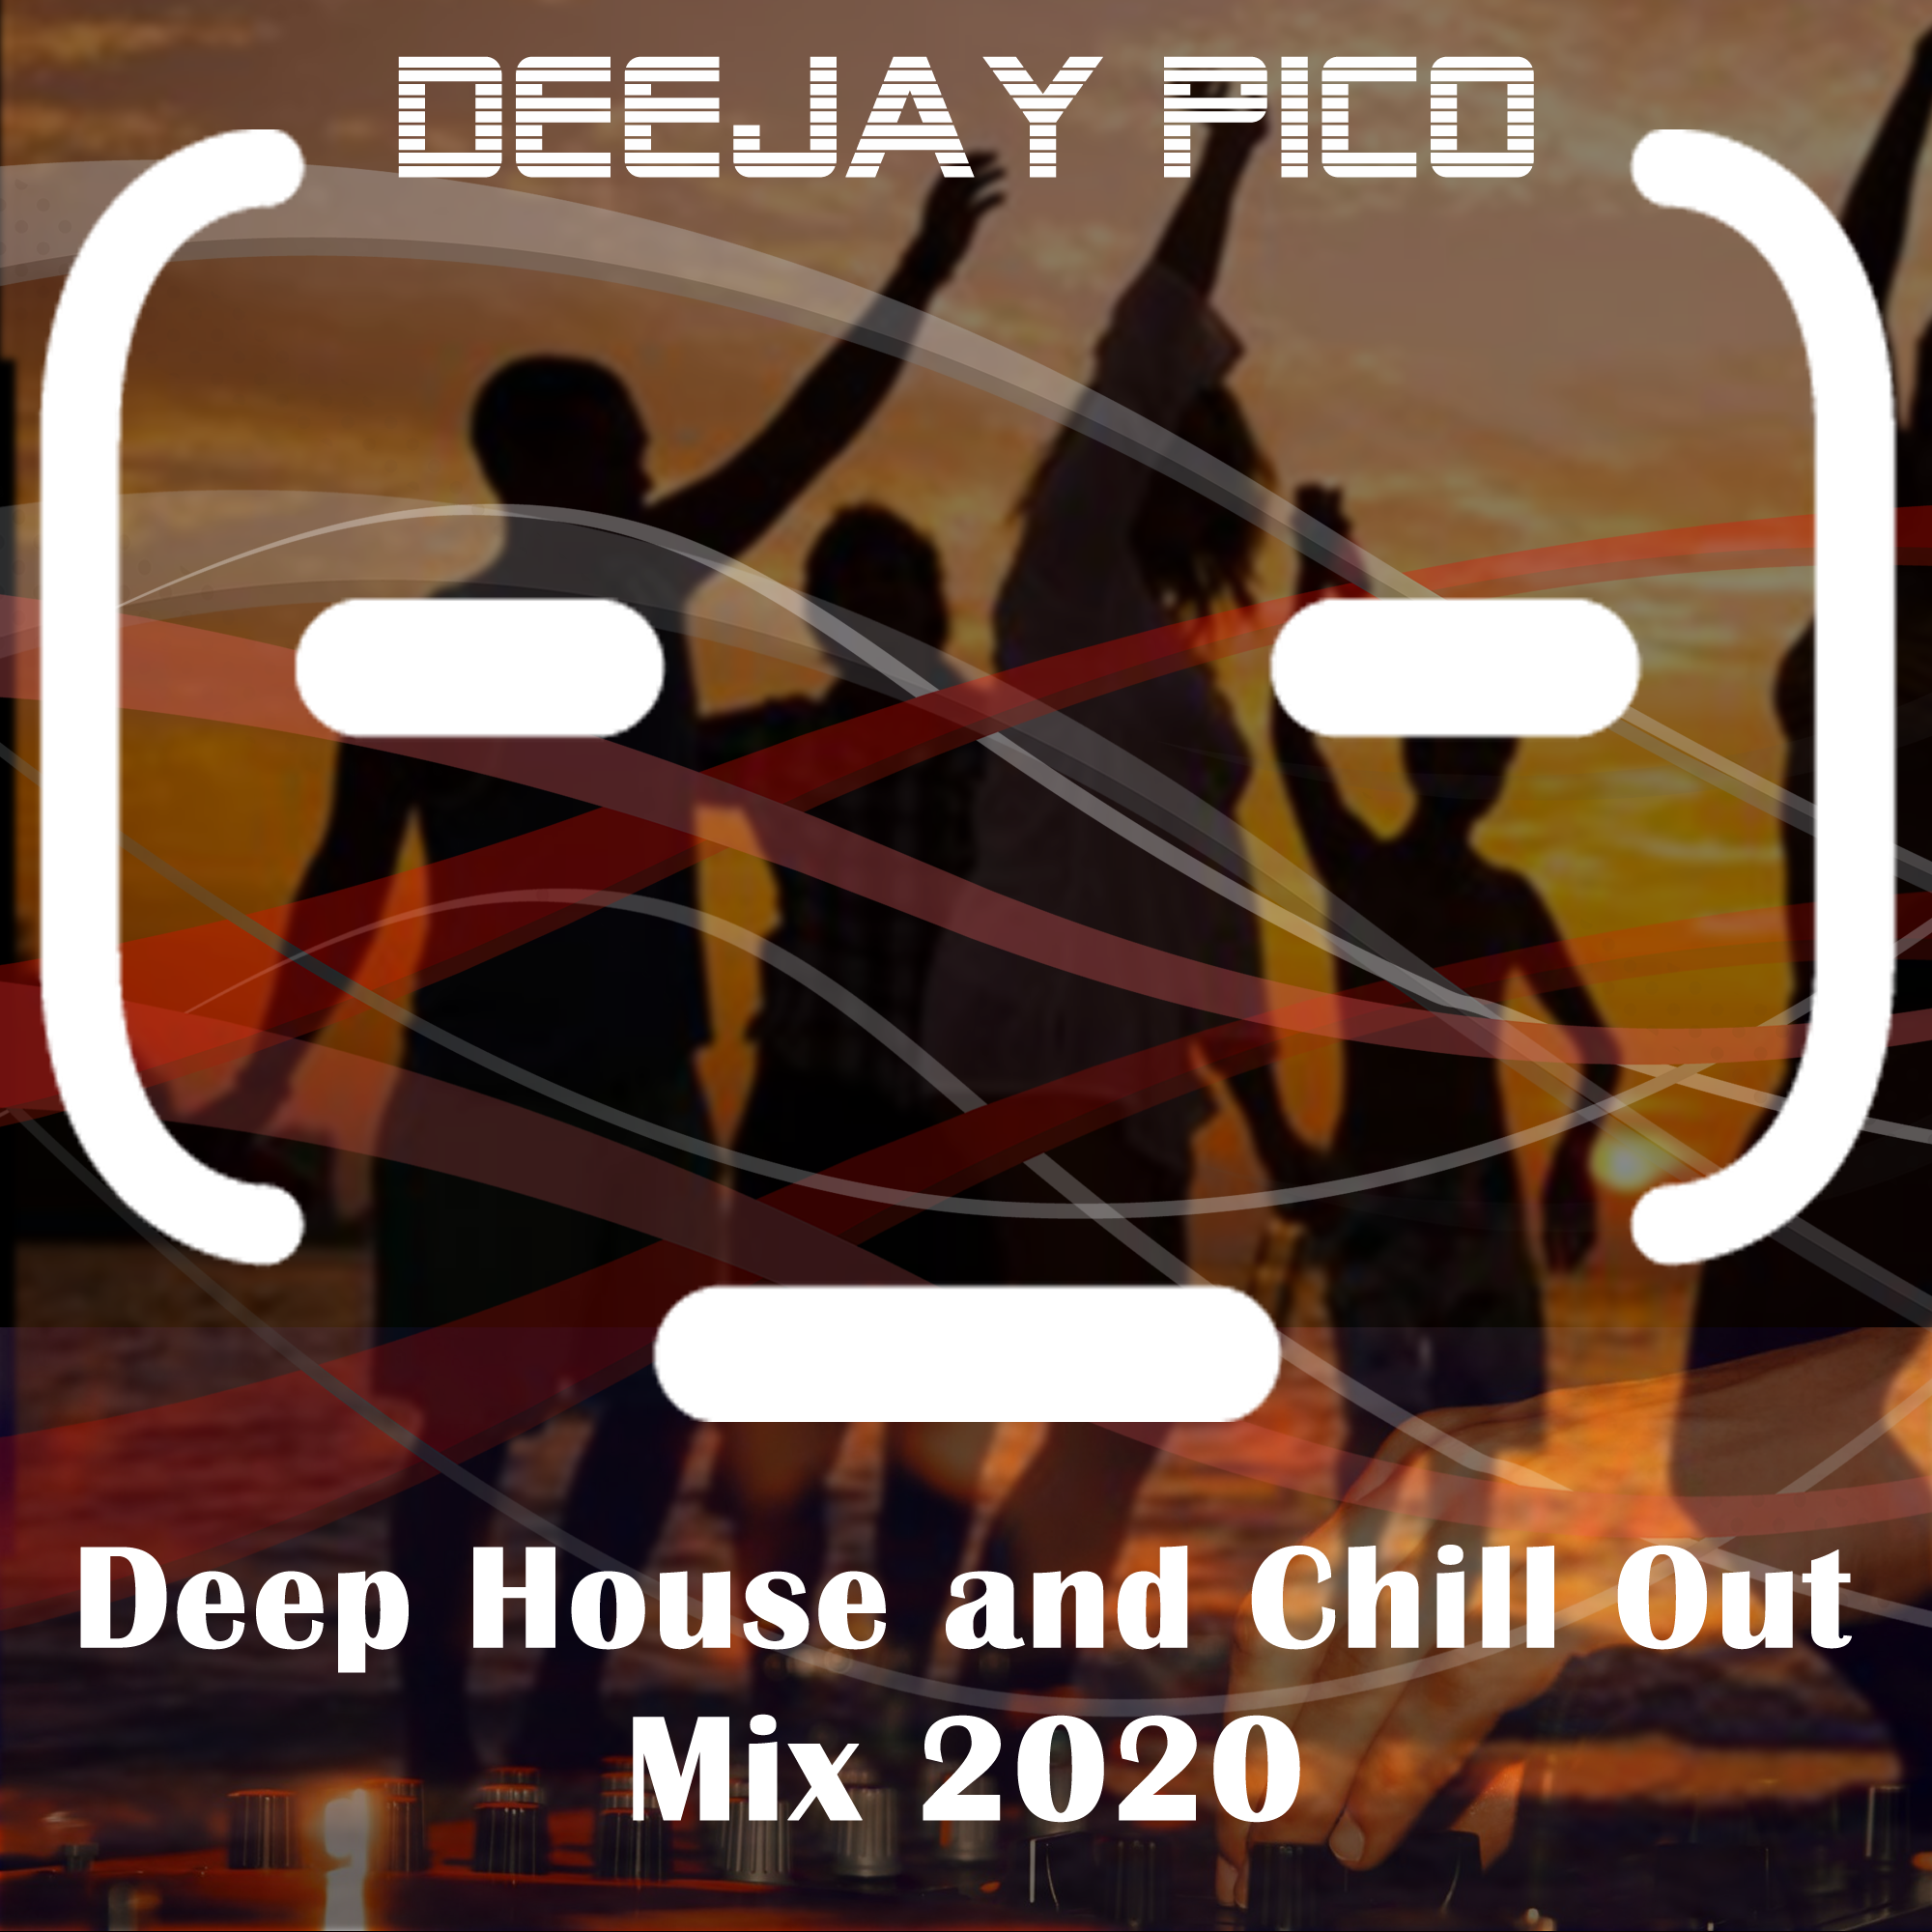 Deep House and Chill Out Mix 2020